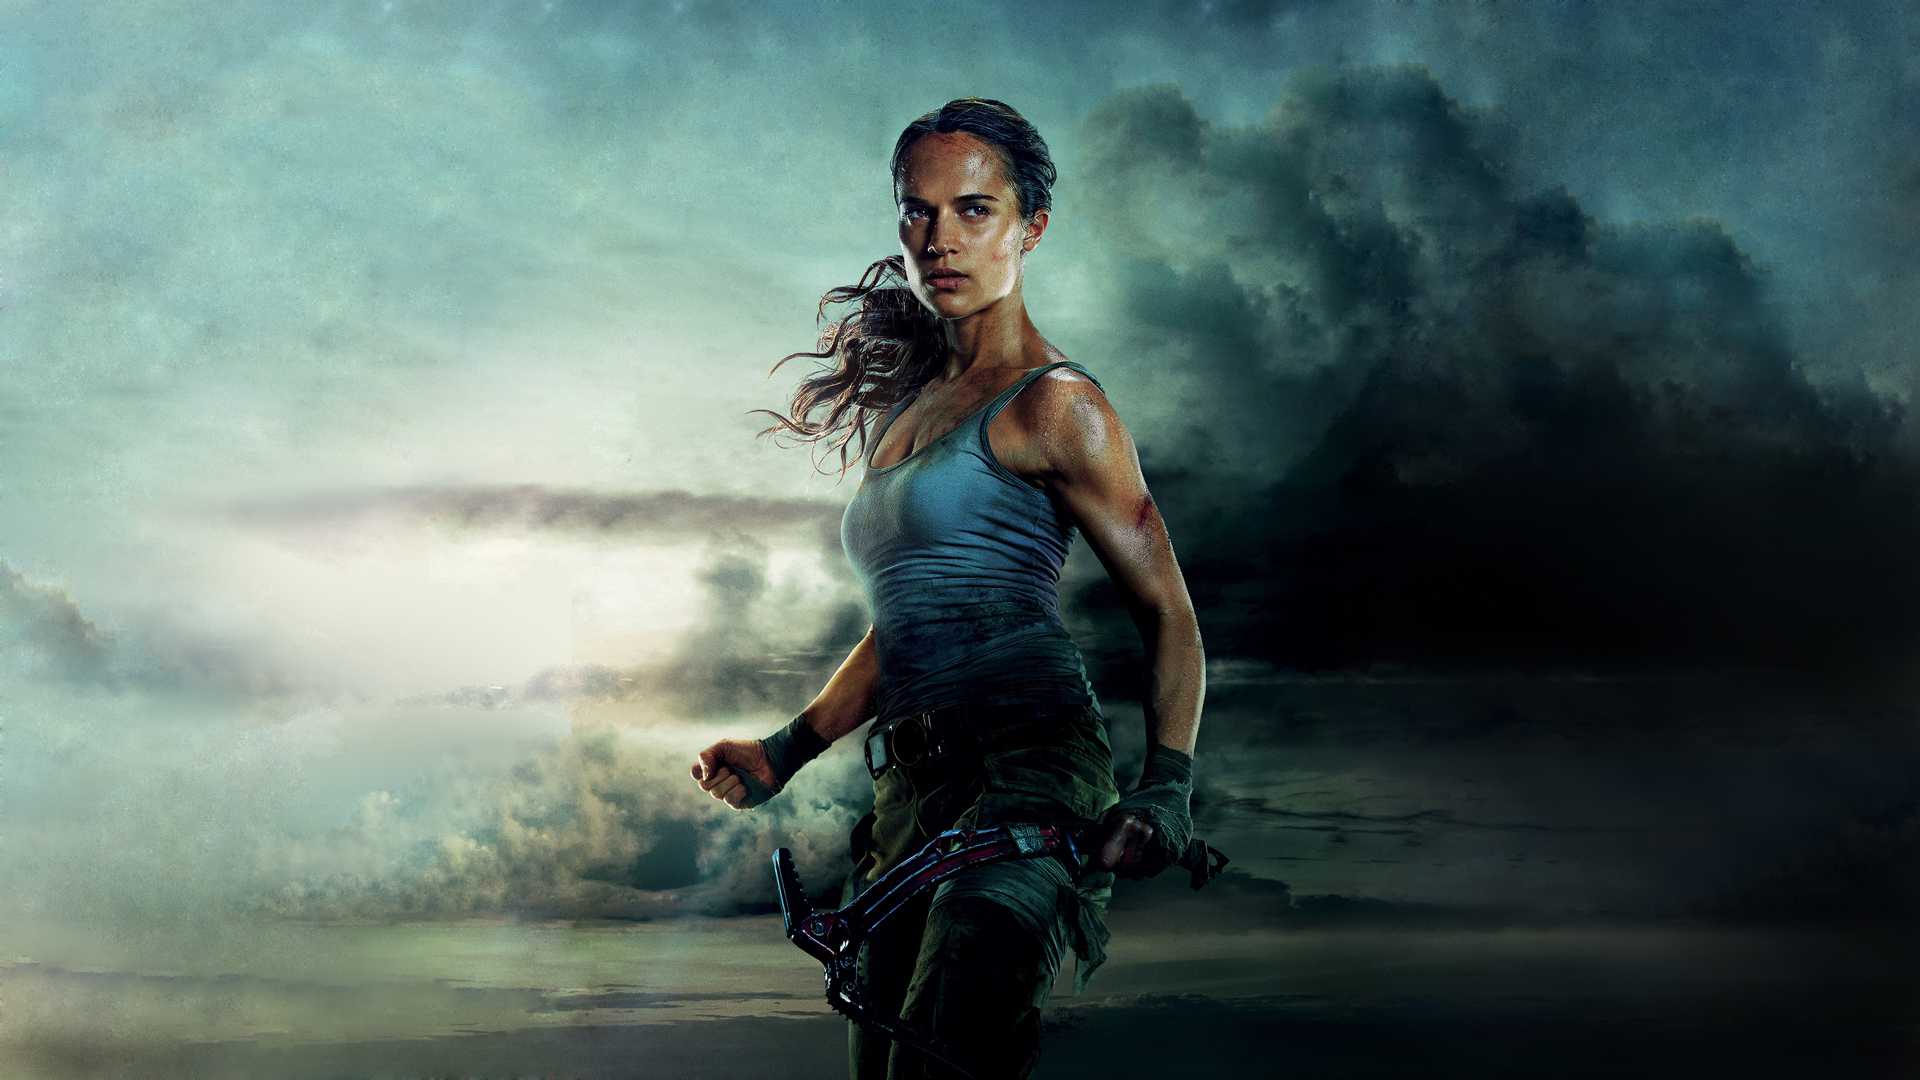 Tomb Raider 2018 Movie Alicia Vikander Hd Movies 4k Wallpapers Images Backgrounds Photos